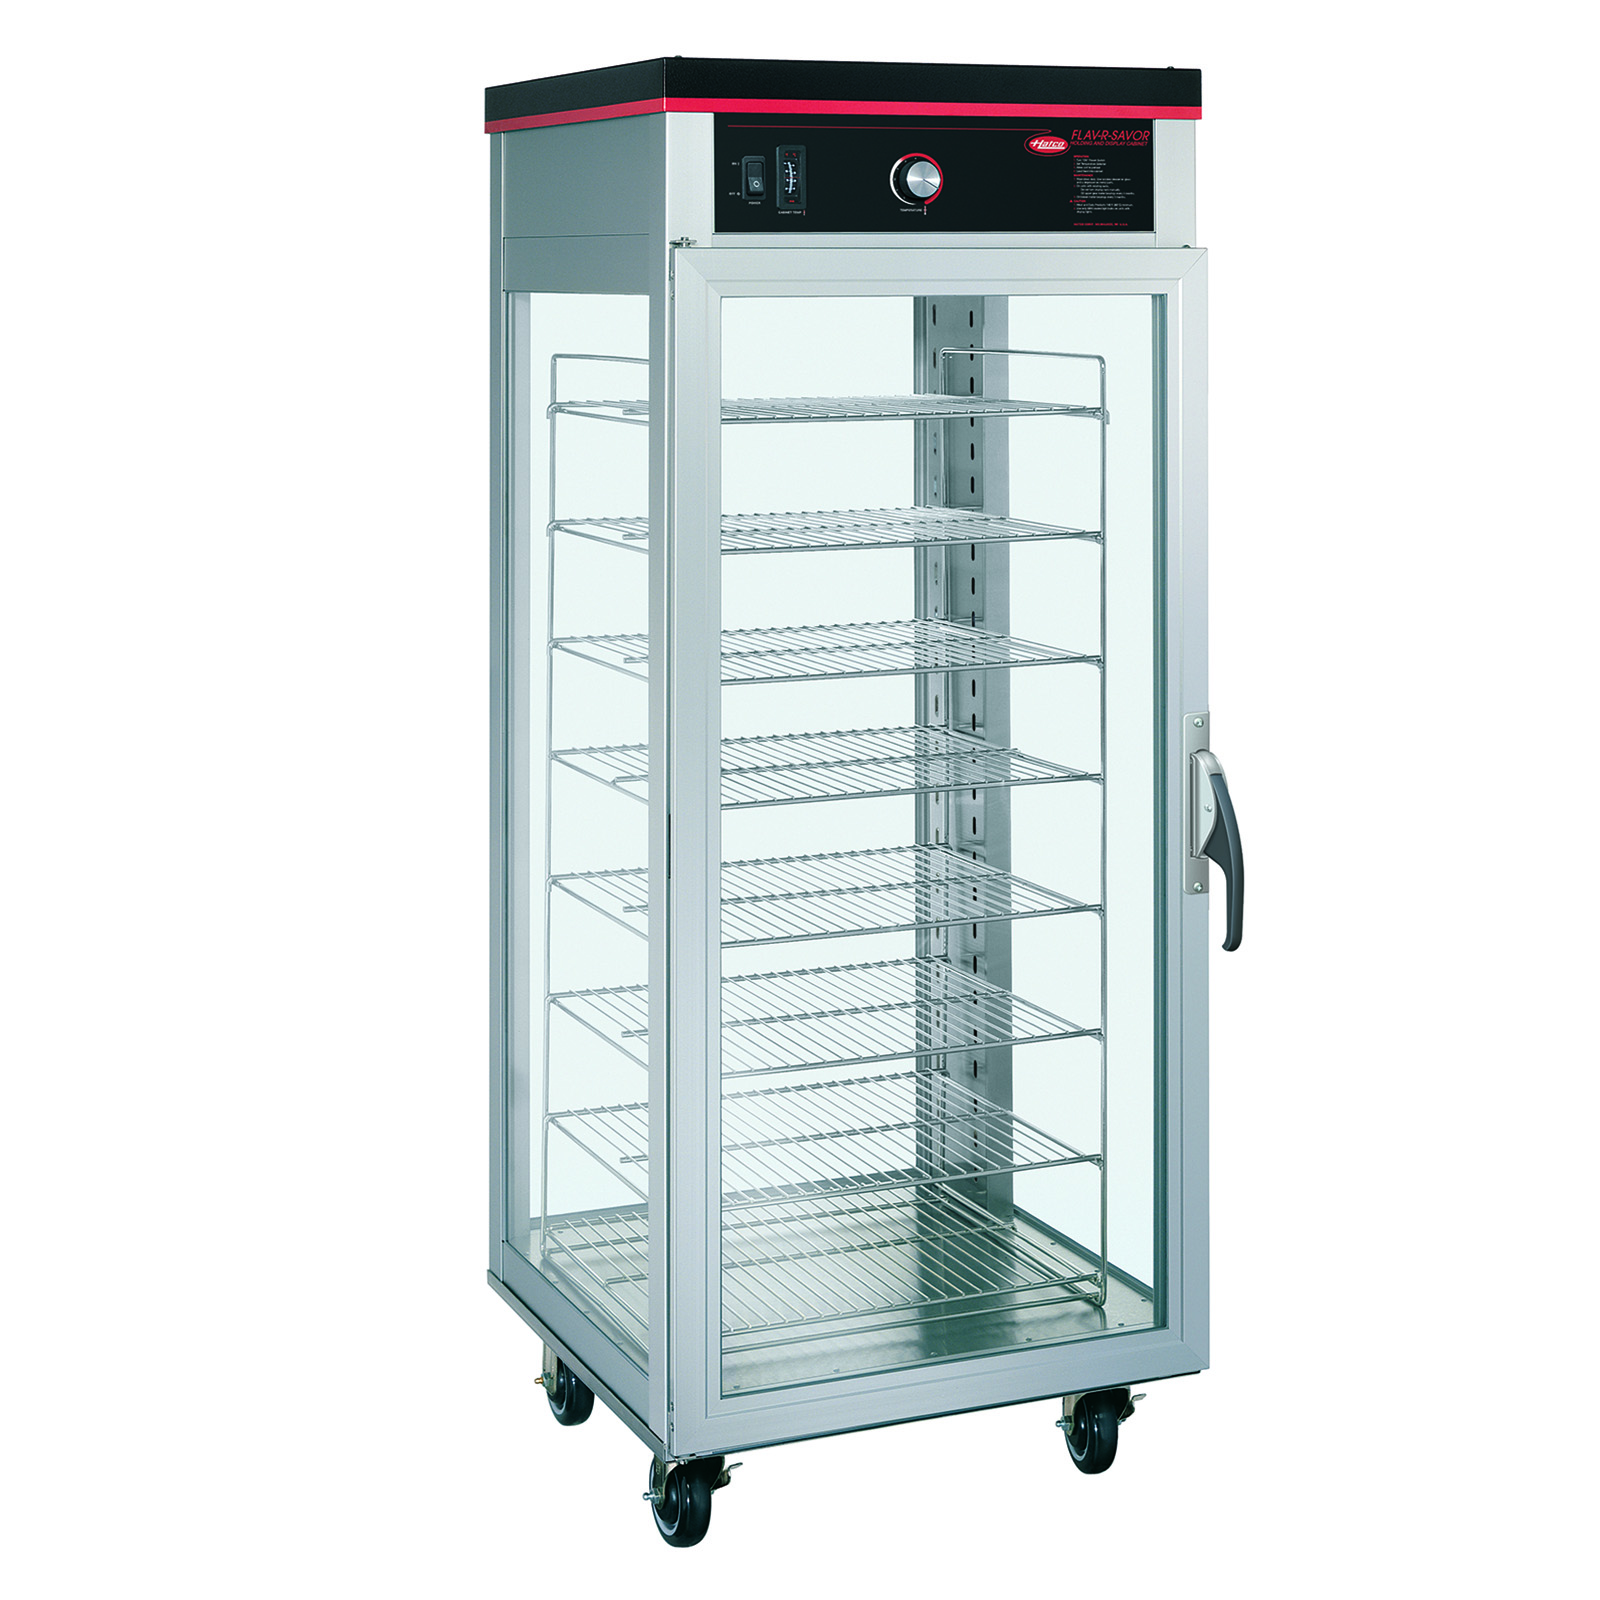 Hatco Pizza Holding Cabinets